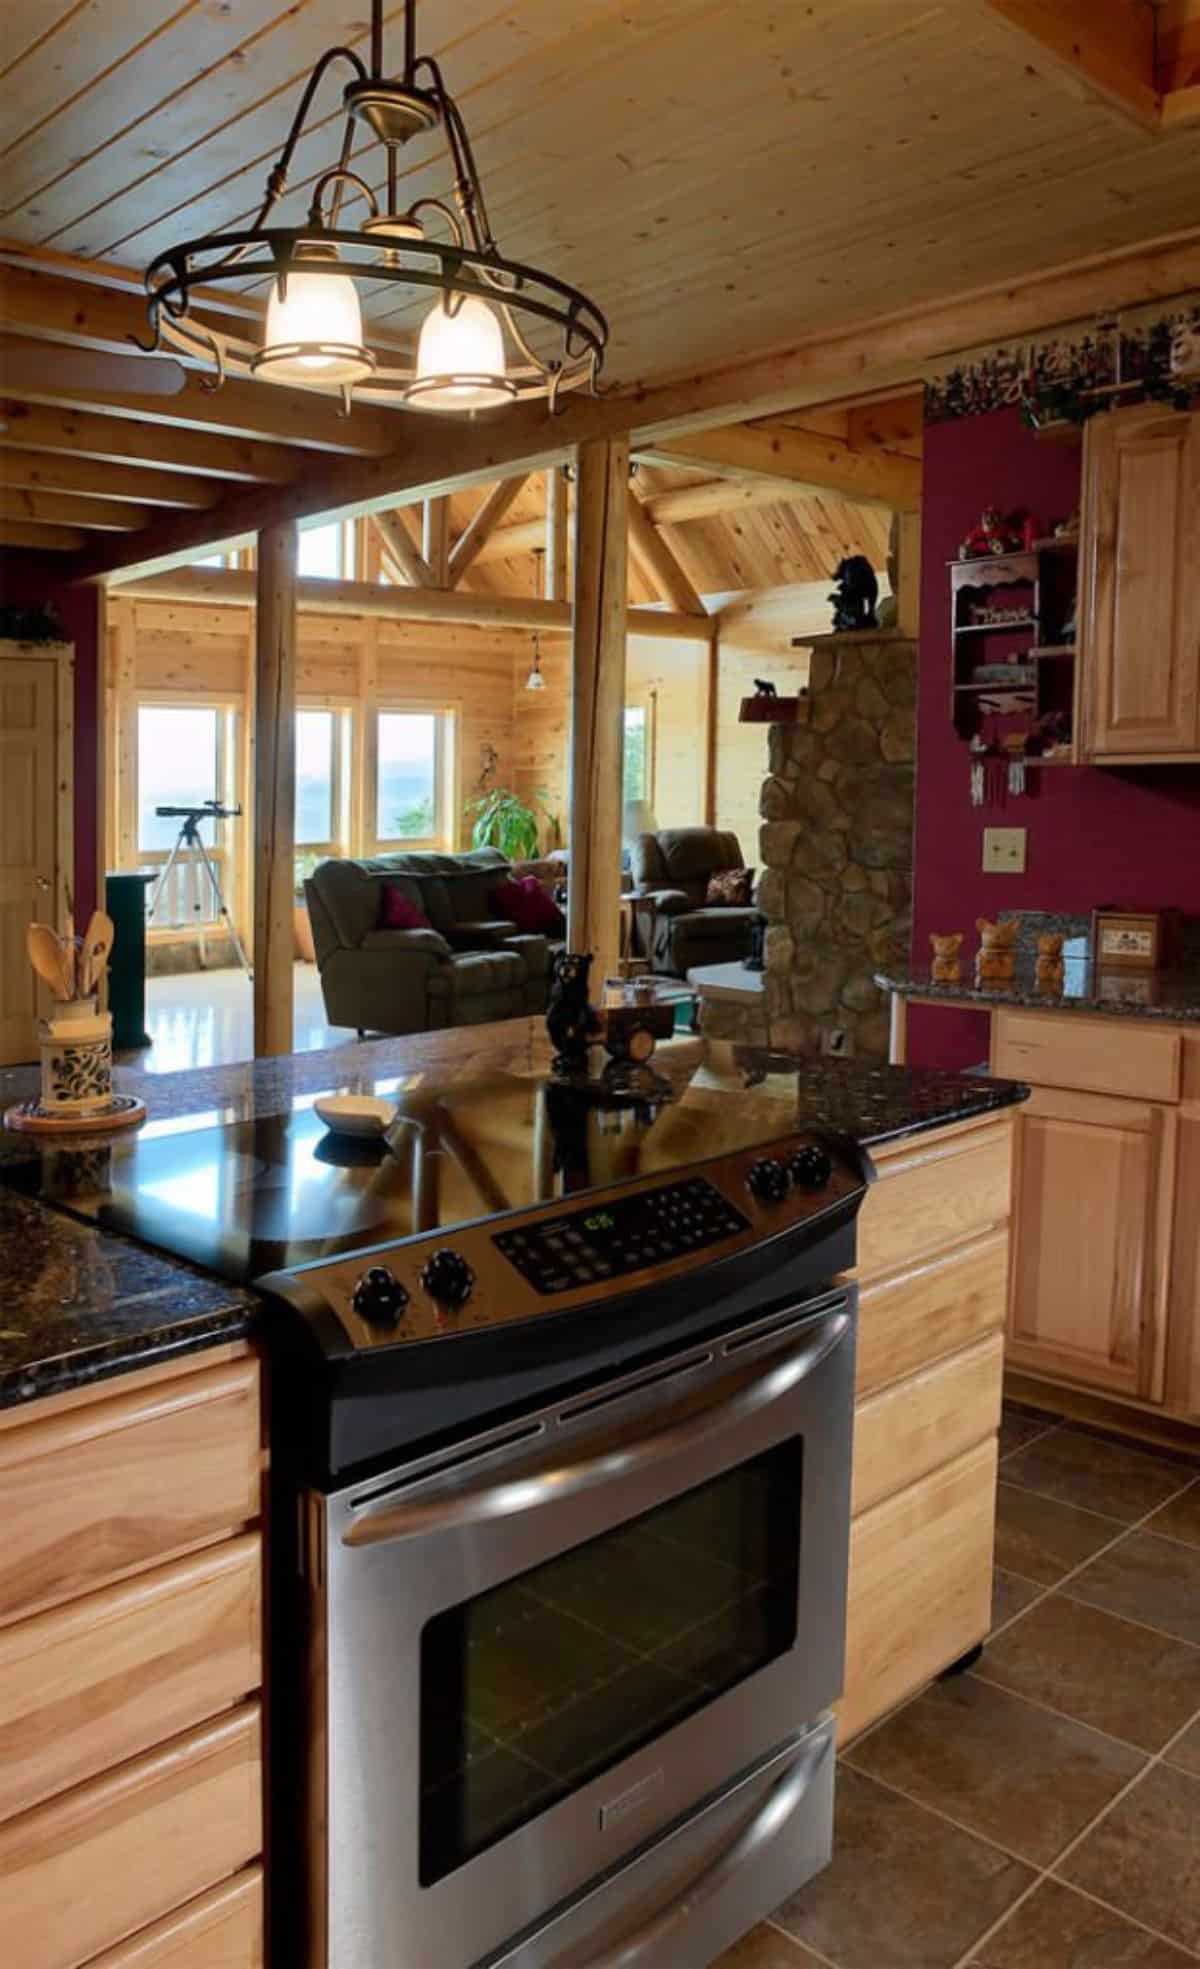 flattop stove in kitchen of cabin